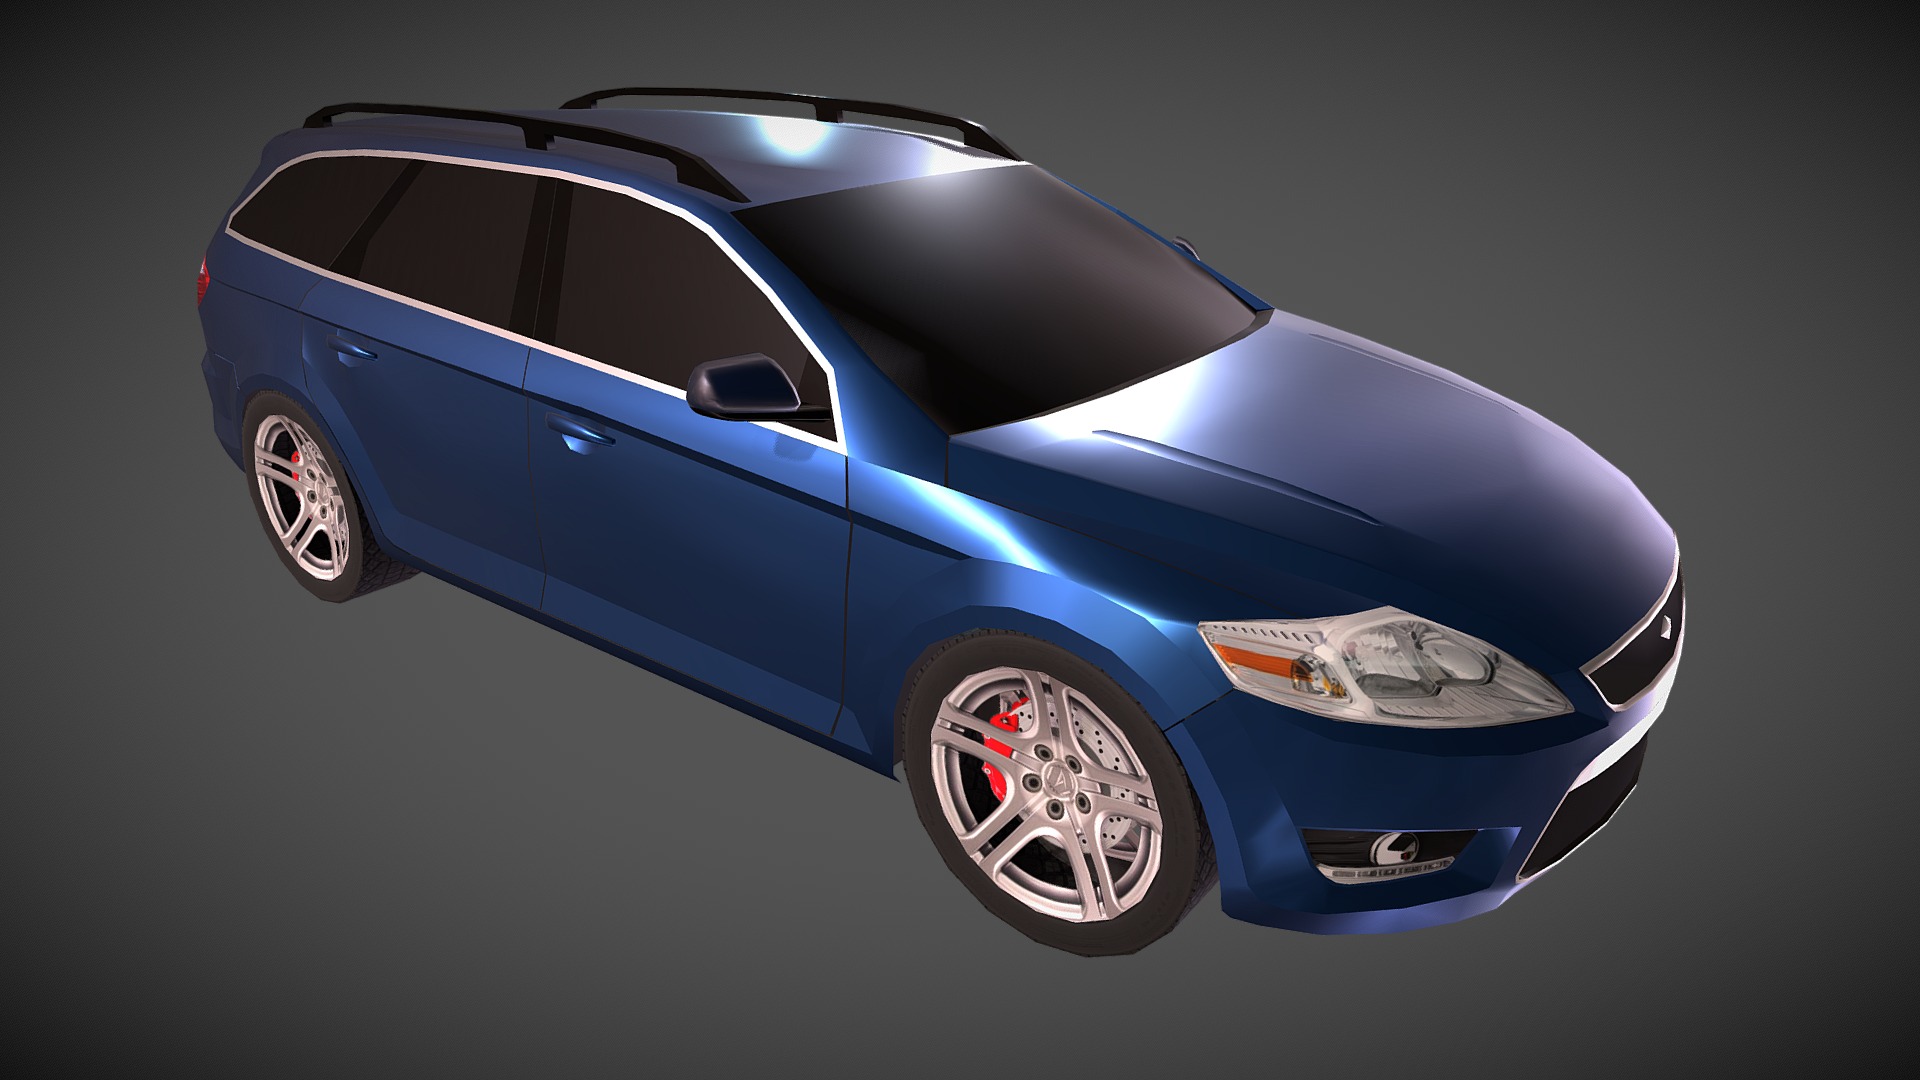 3D model Wagon1 - This is a 3D model of the Wagon1. The 3D model is about a blue car with a spoiler.